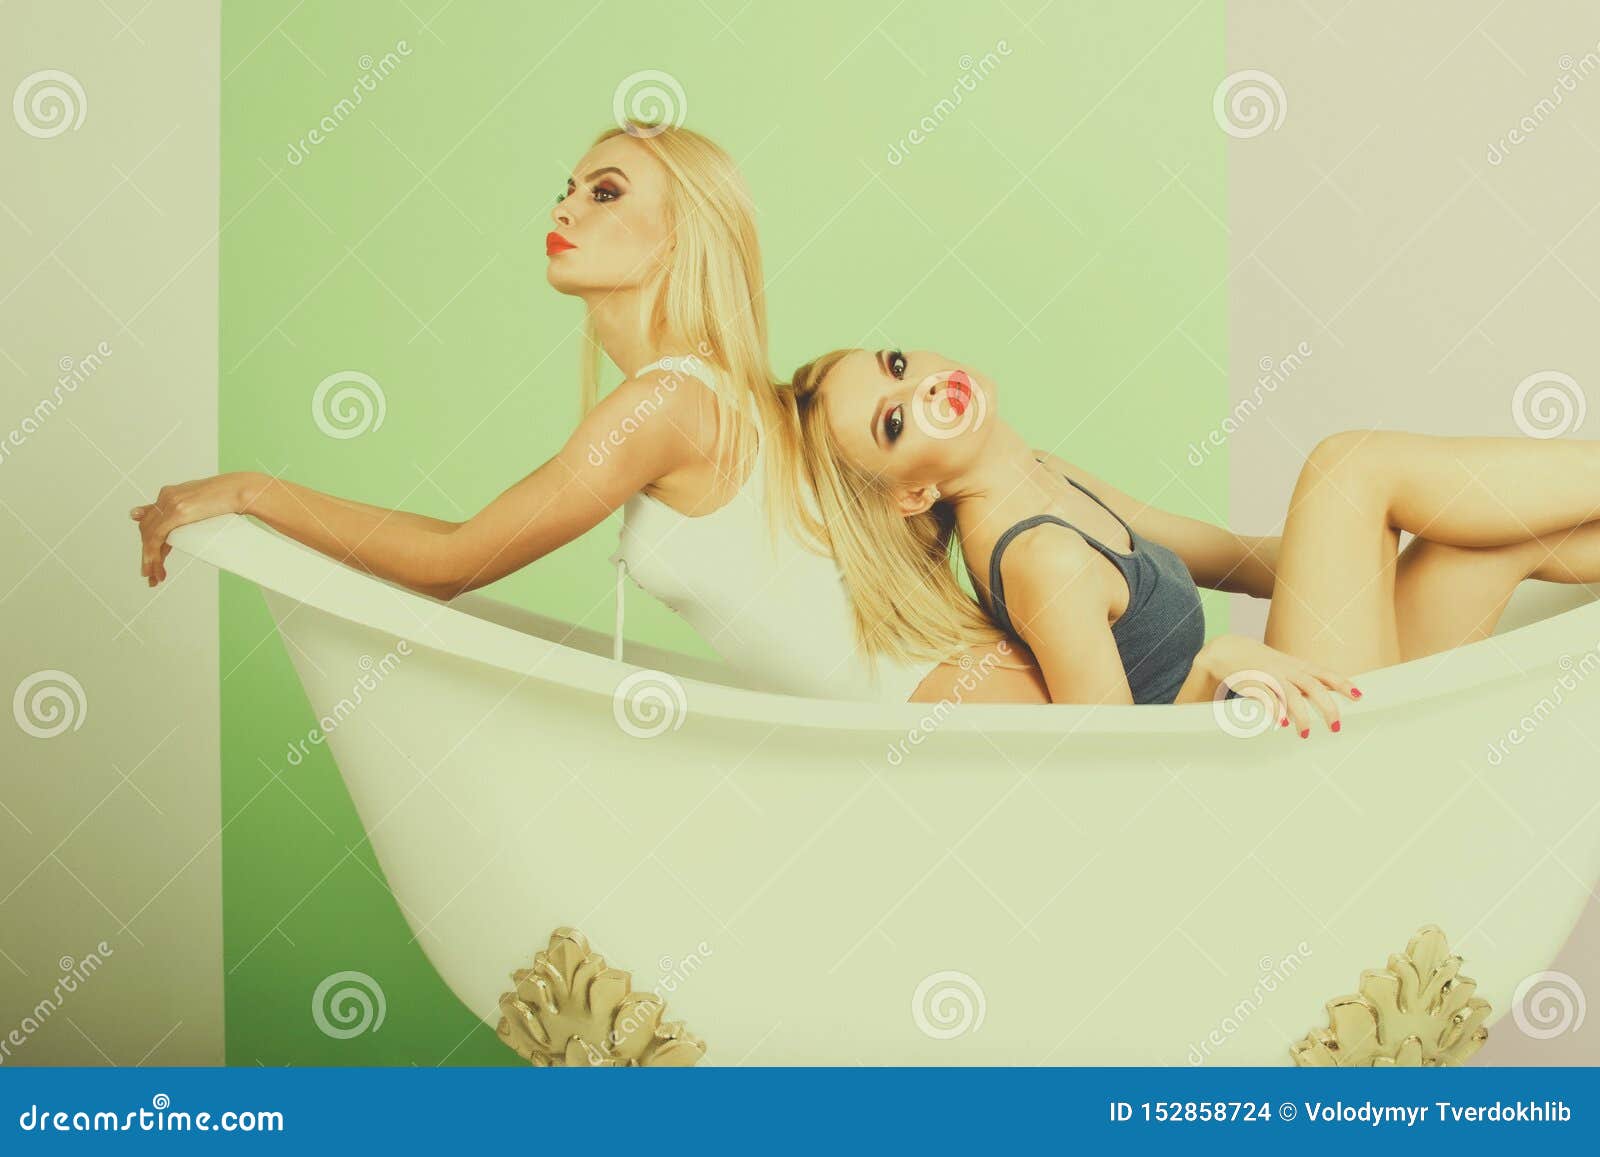 Sexy lesbians get hot in the tub